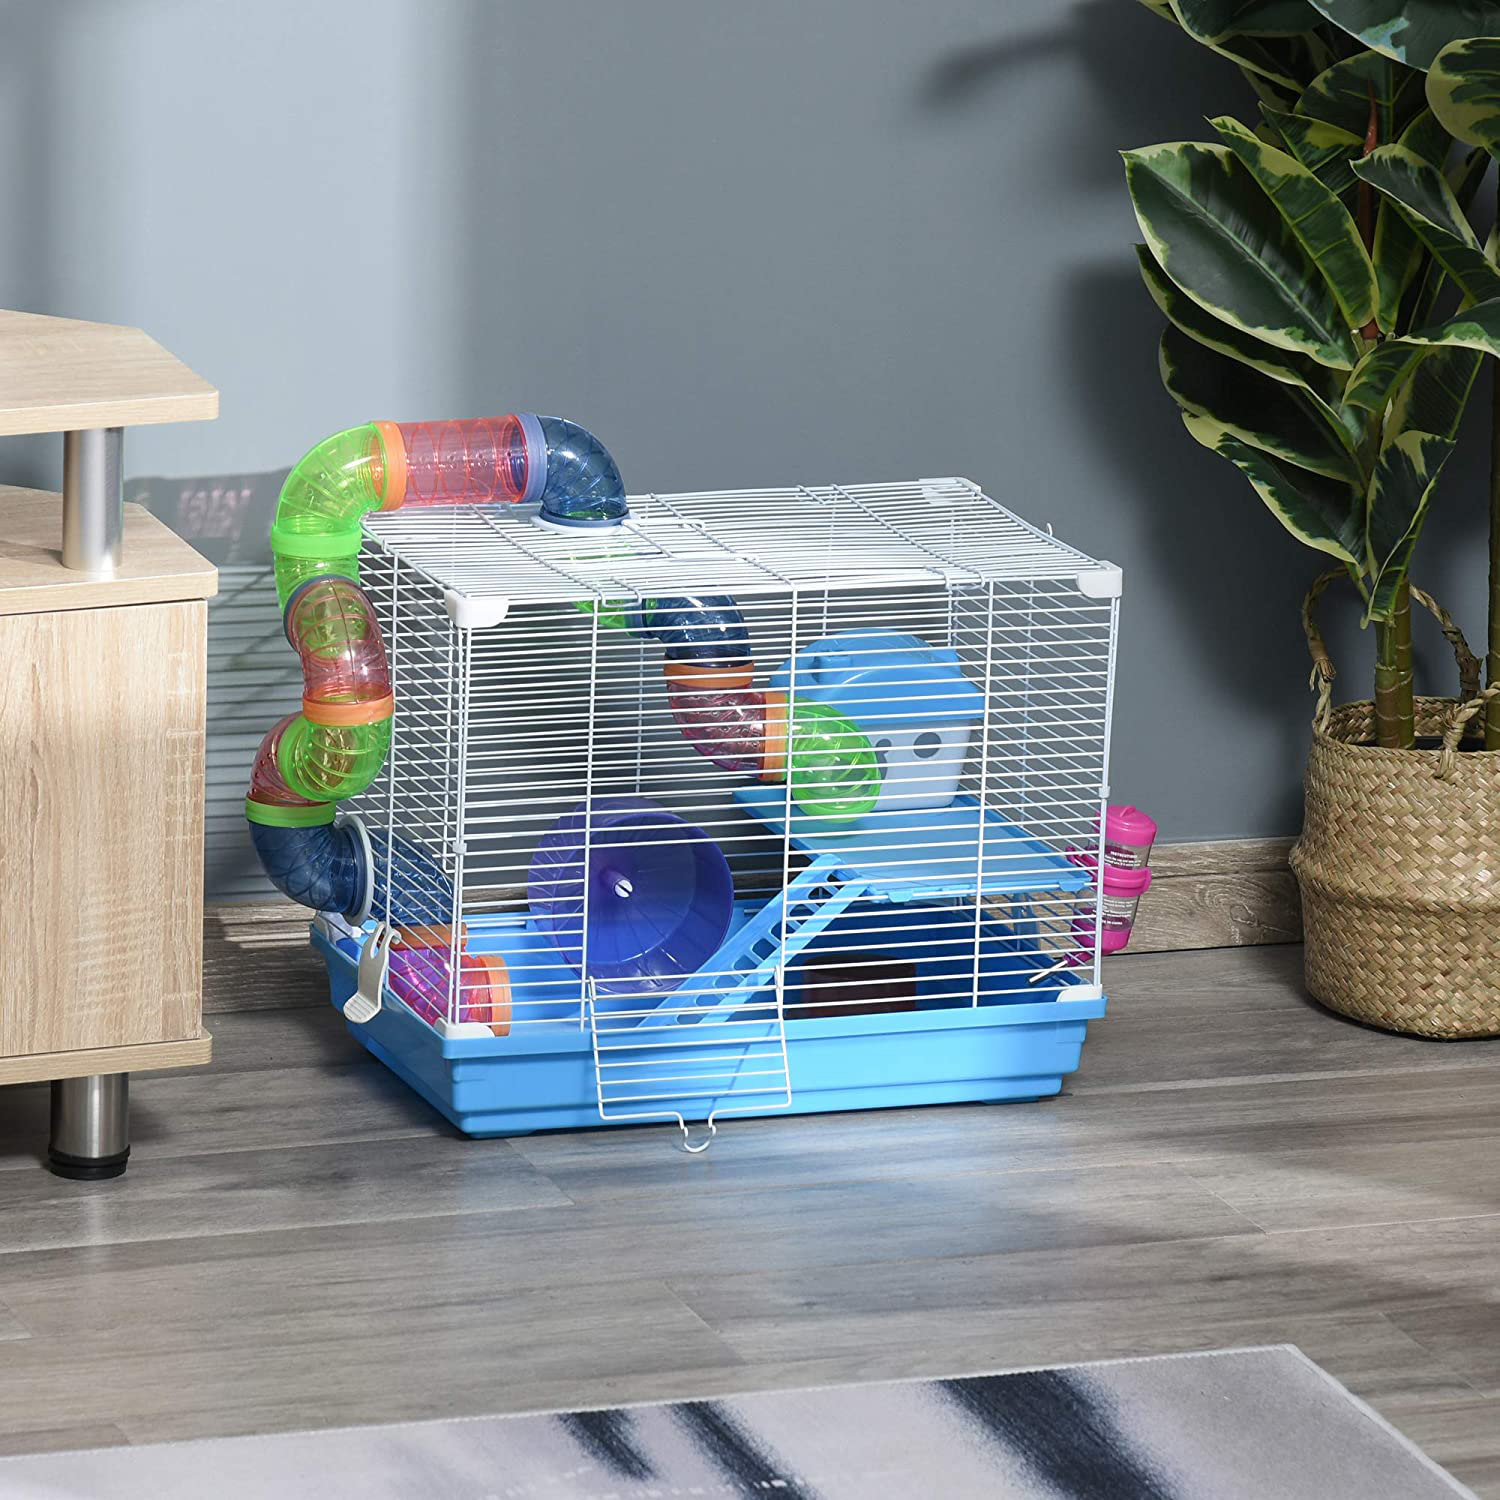 Pawhut 2-Level Hamster Cage Gerbil House Habitat Kit Small Animal Travel Carrier with Exercise Wheel, Play Tubes, Water Bottle, Food Dishes, & Interior Ladder